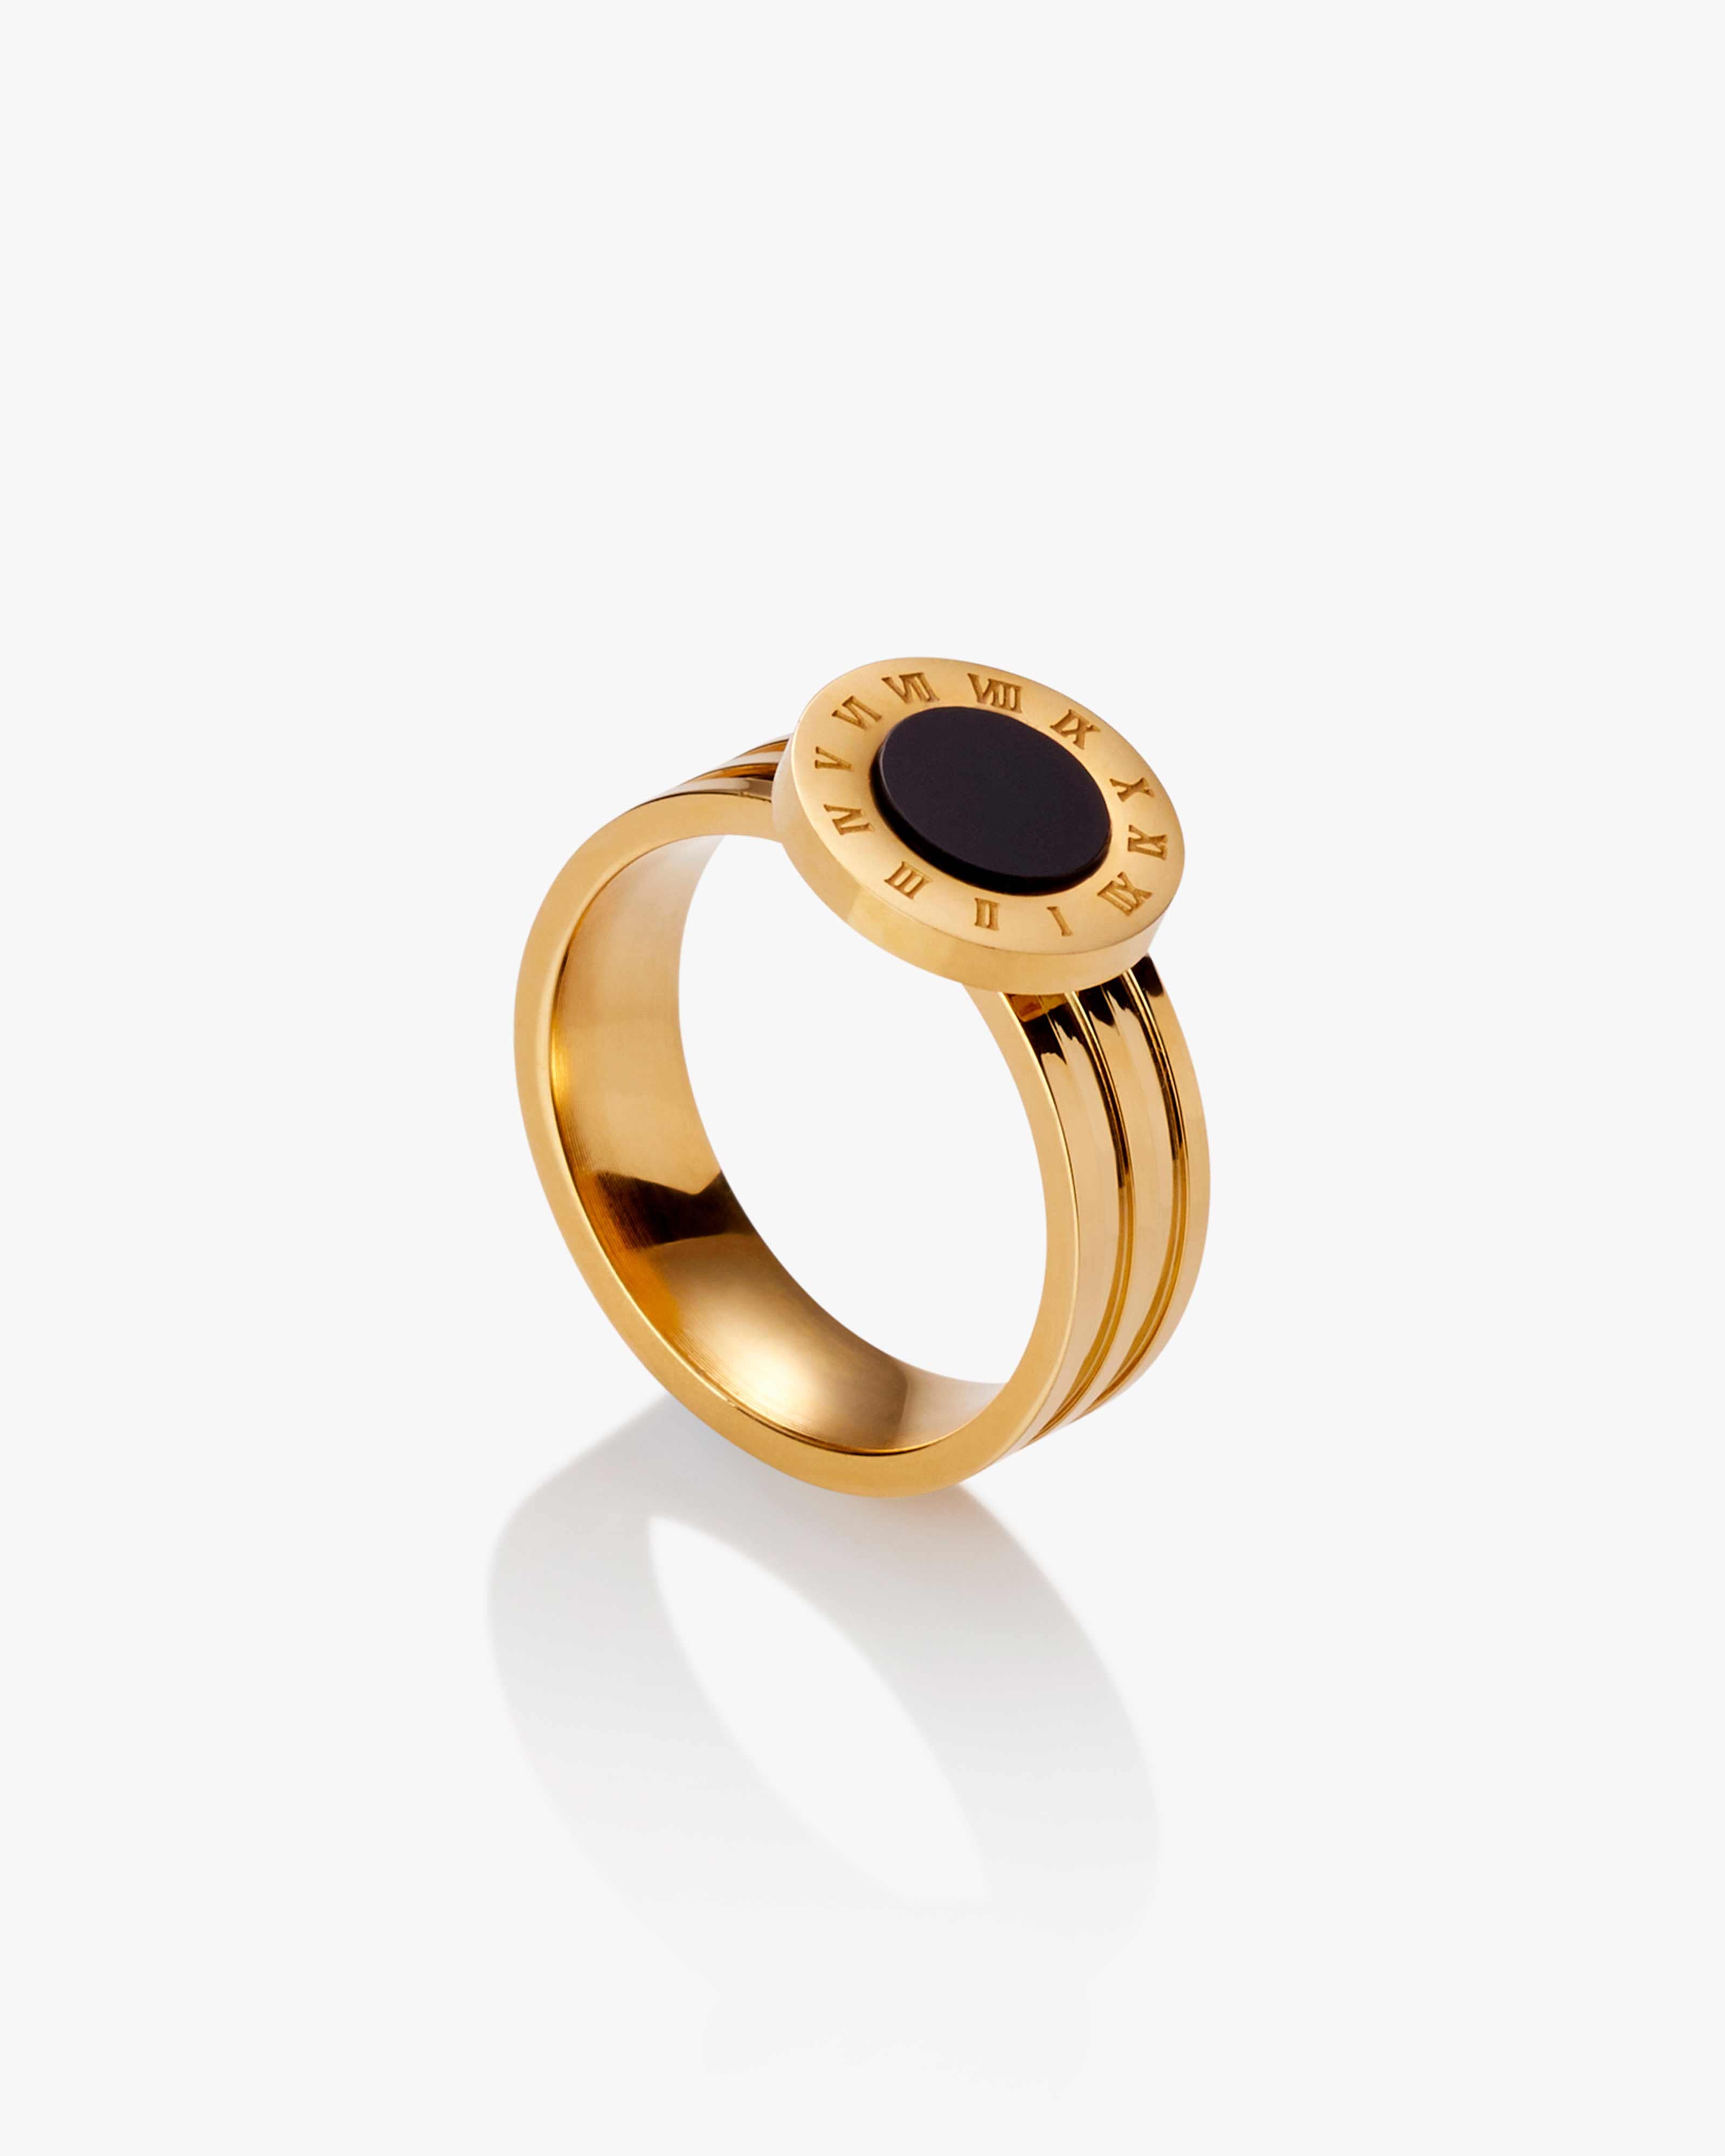 Gold & Black Roman Numeral Dial Ring